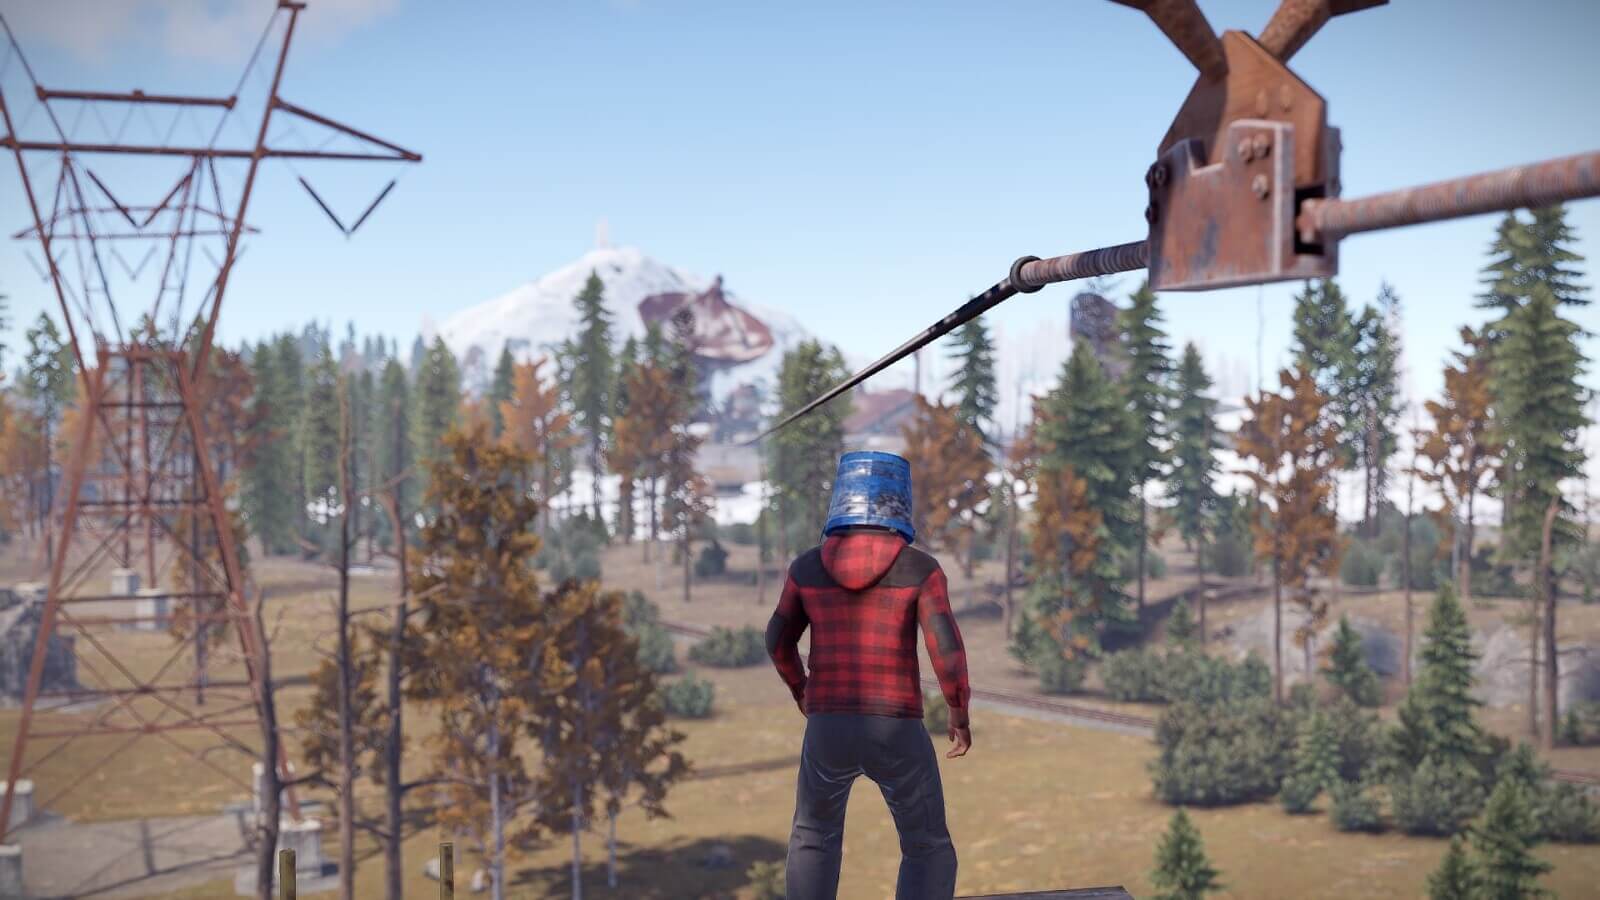 Utilize nearby ziplines possibly if they're connected to the satellite dish monument to enter this monument quickly.